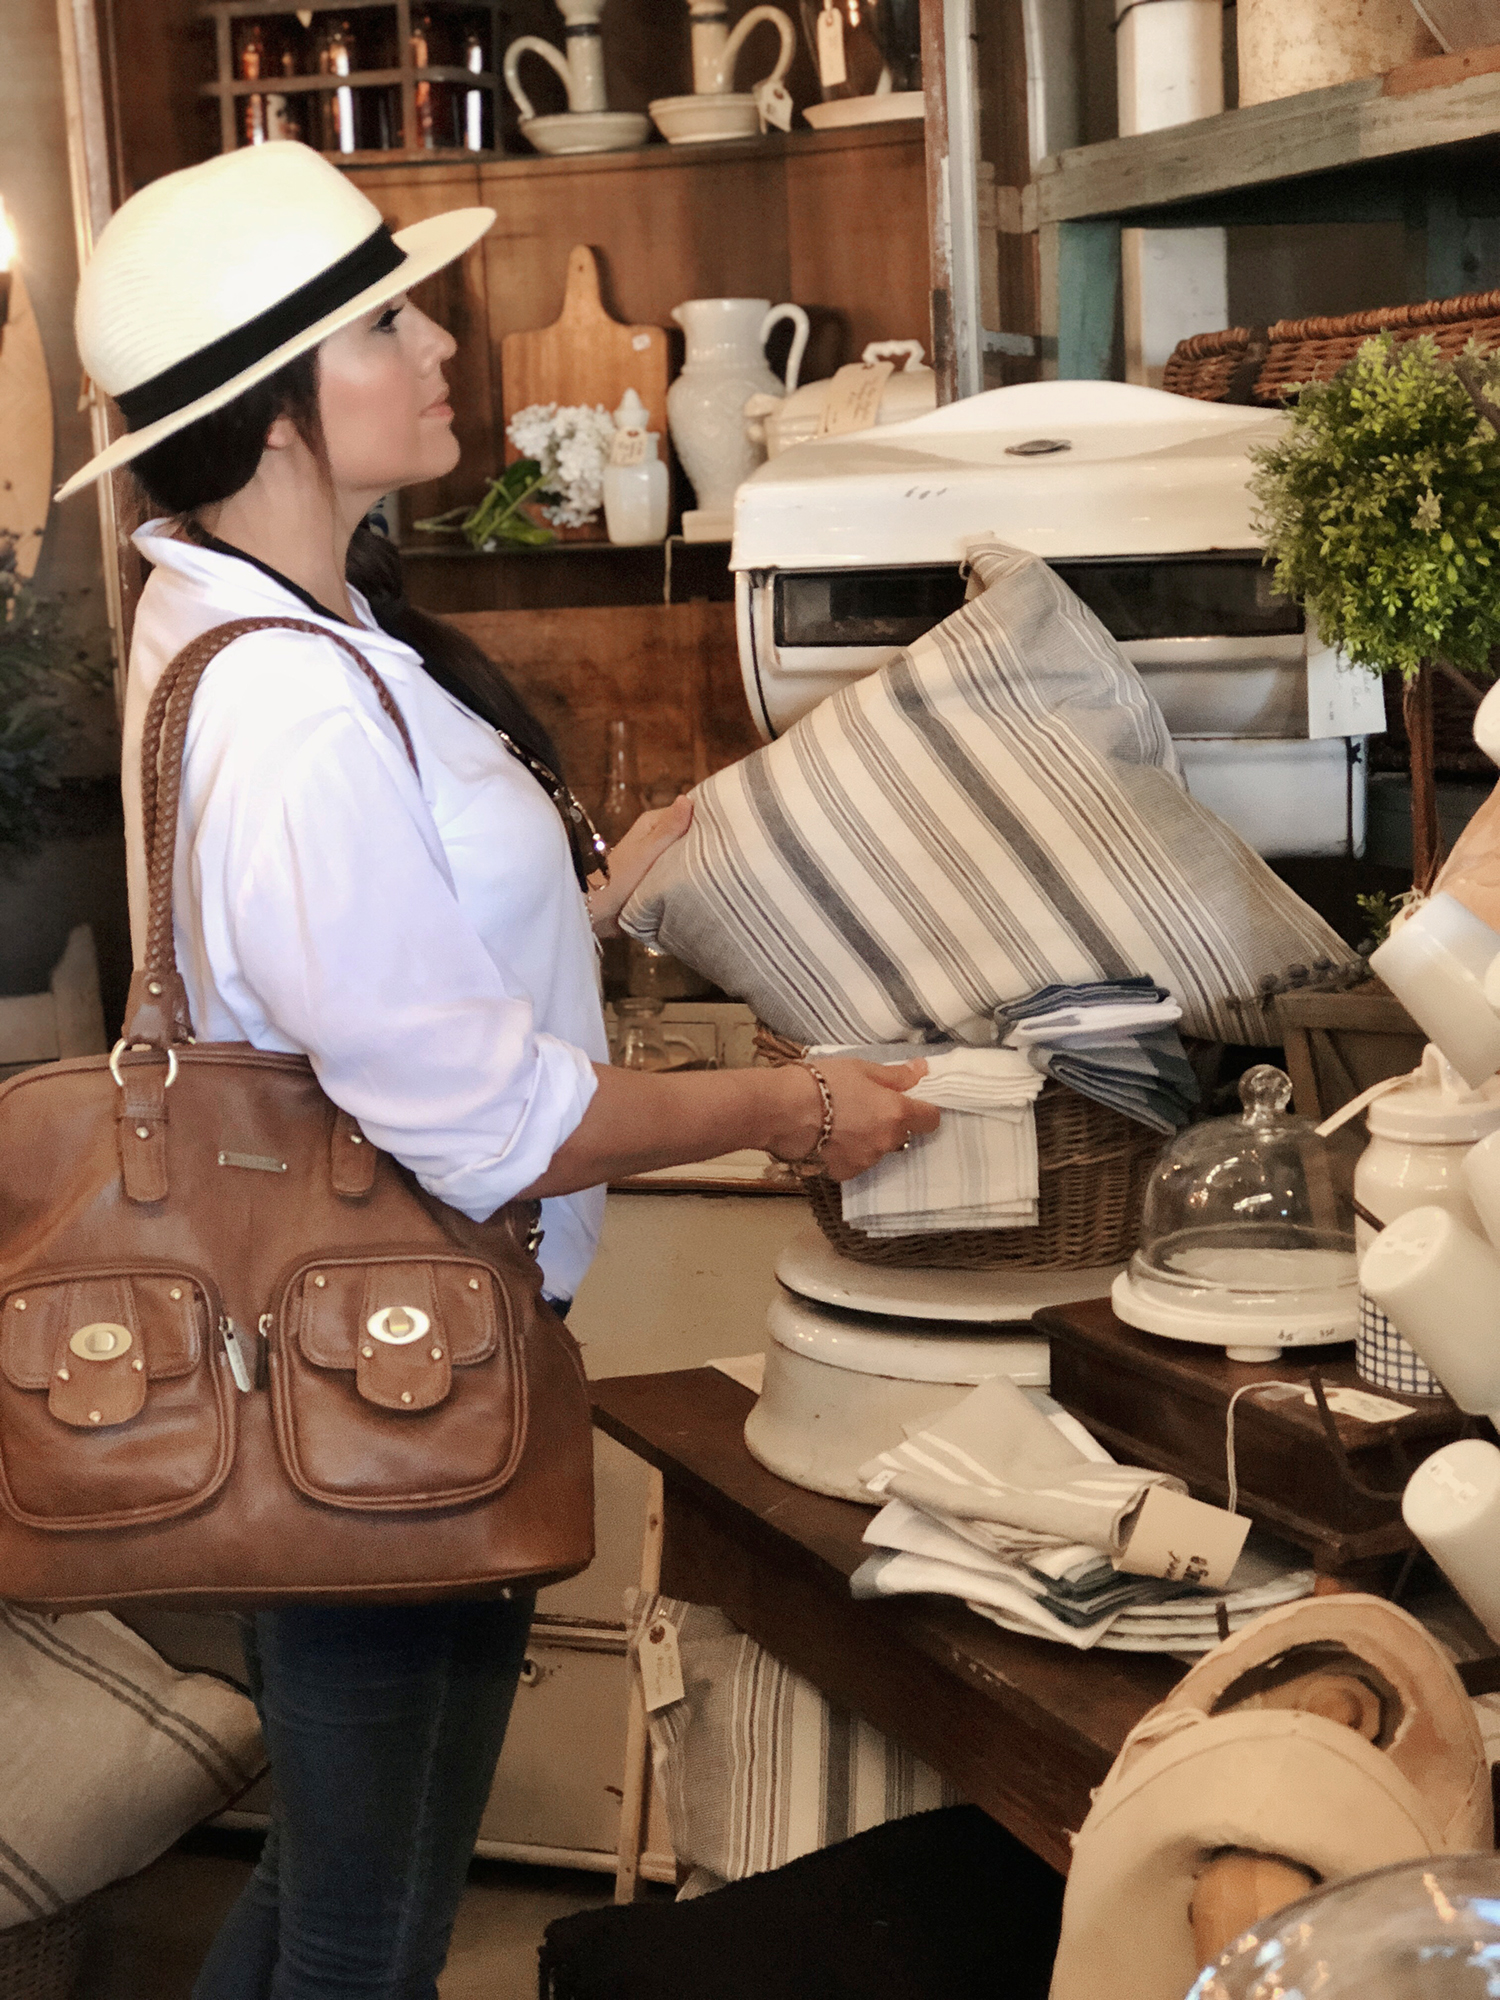 Treasure hunting at the Sweet Salvage Vintage Market in Phoenix, Arizona. Get a peek into this one-a-month market filled to the brim with beautiful finds and gorgeous designs #Phoenix #Arizona #VintageMarket #PhoenixArizonaLiving #ThingsToDoInPhoenixArizona #SweetSalvageOn7th #VintageDecor 